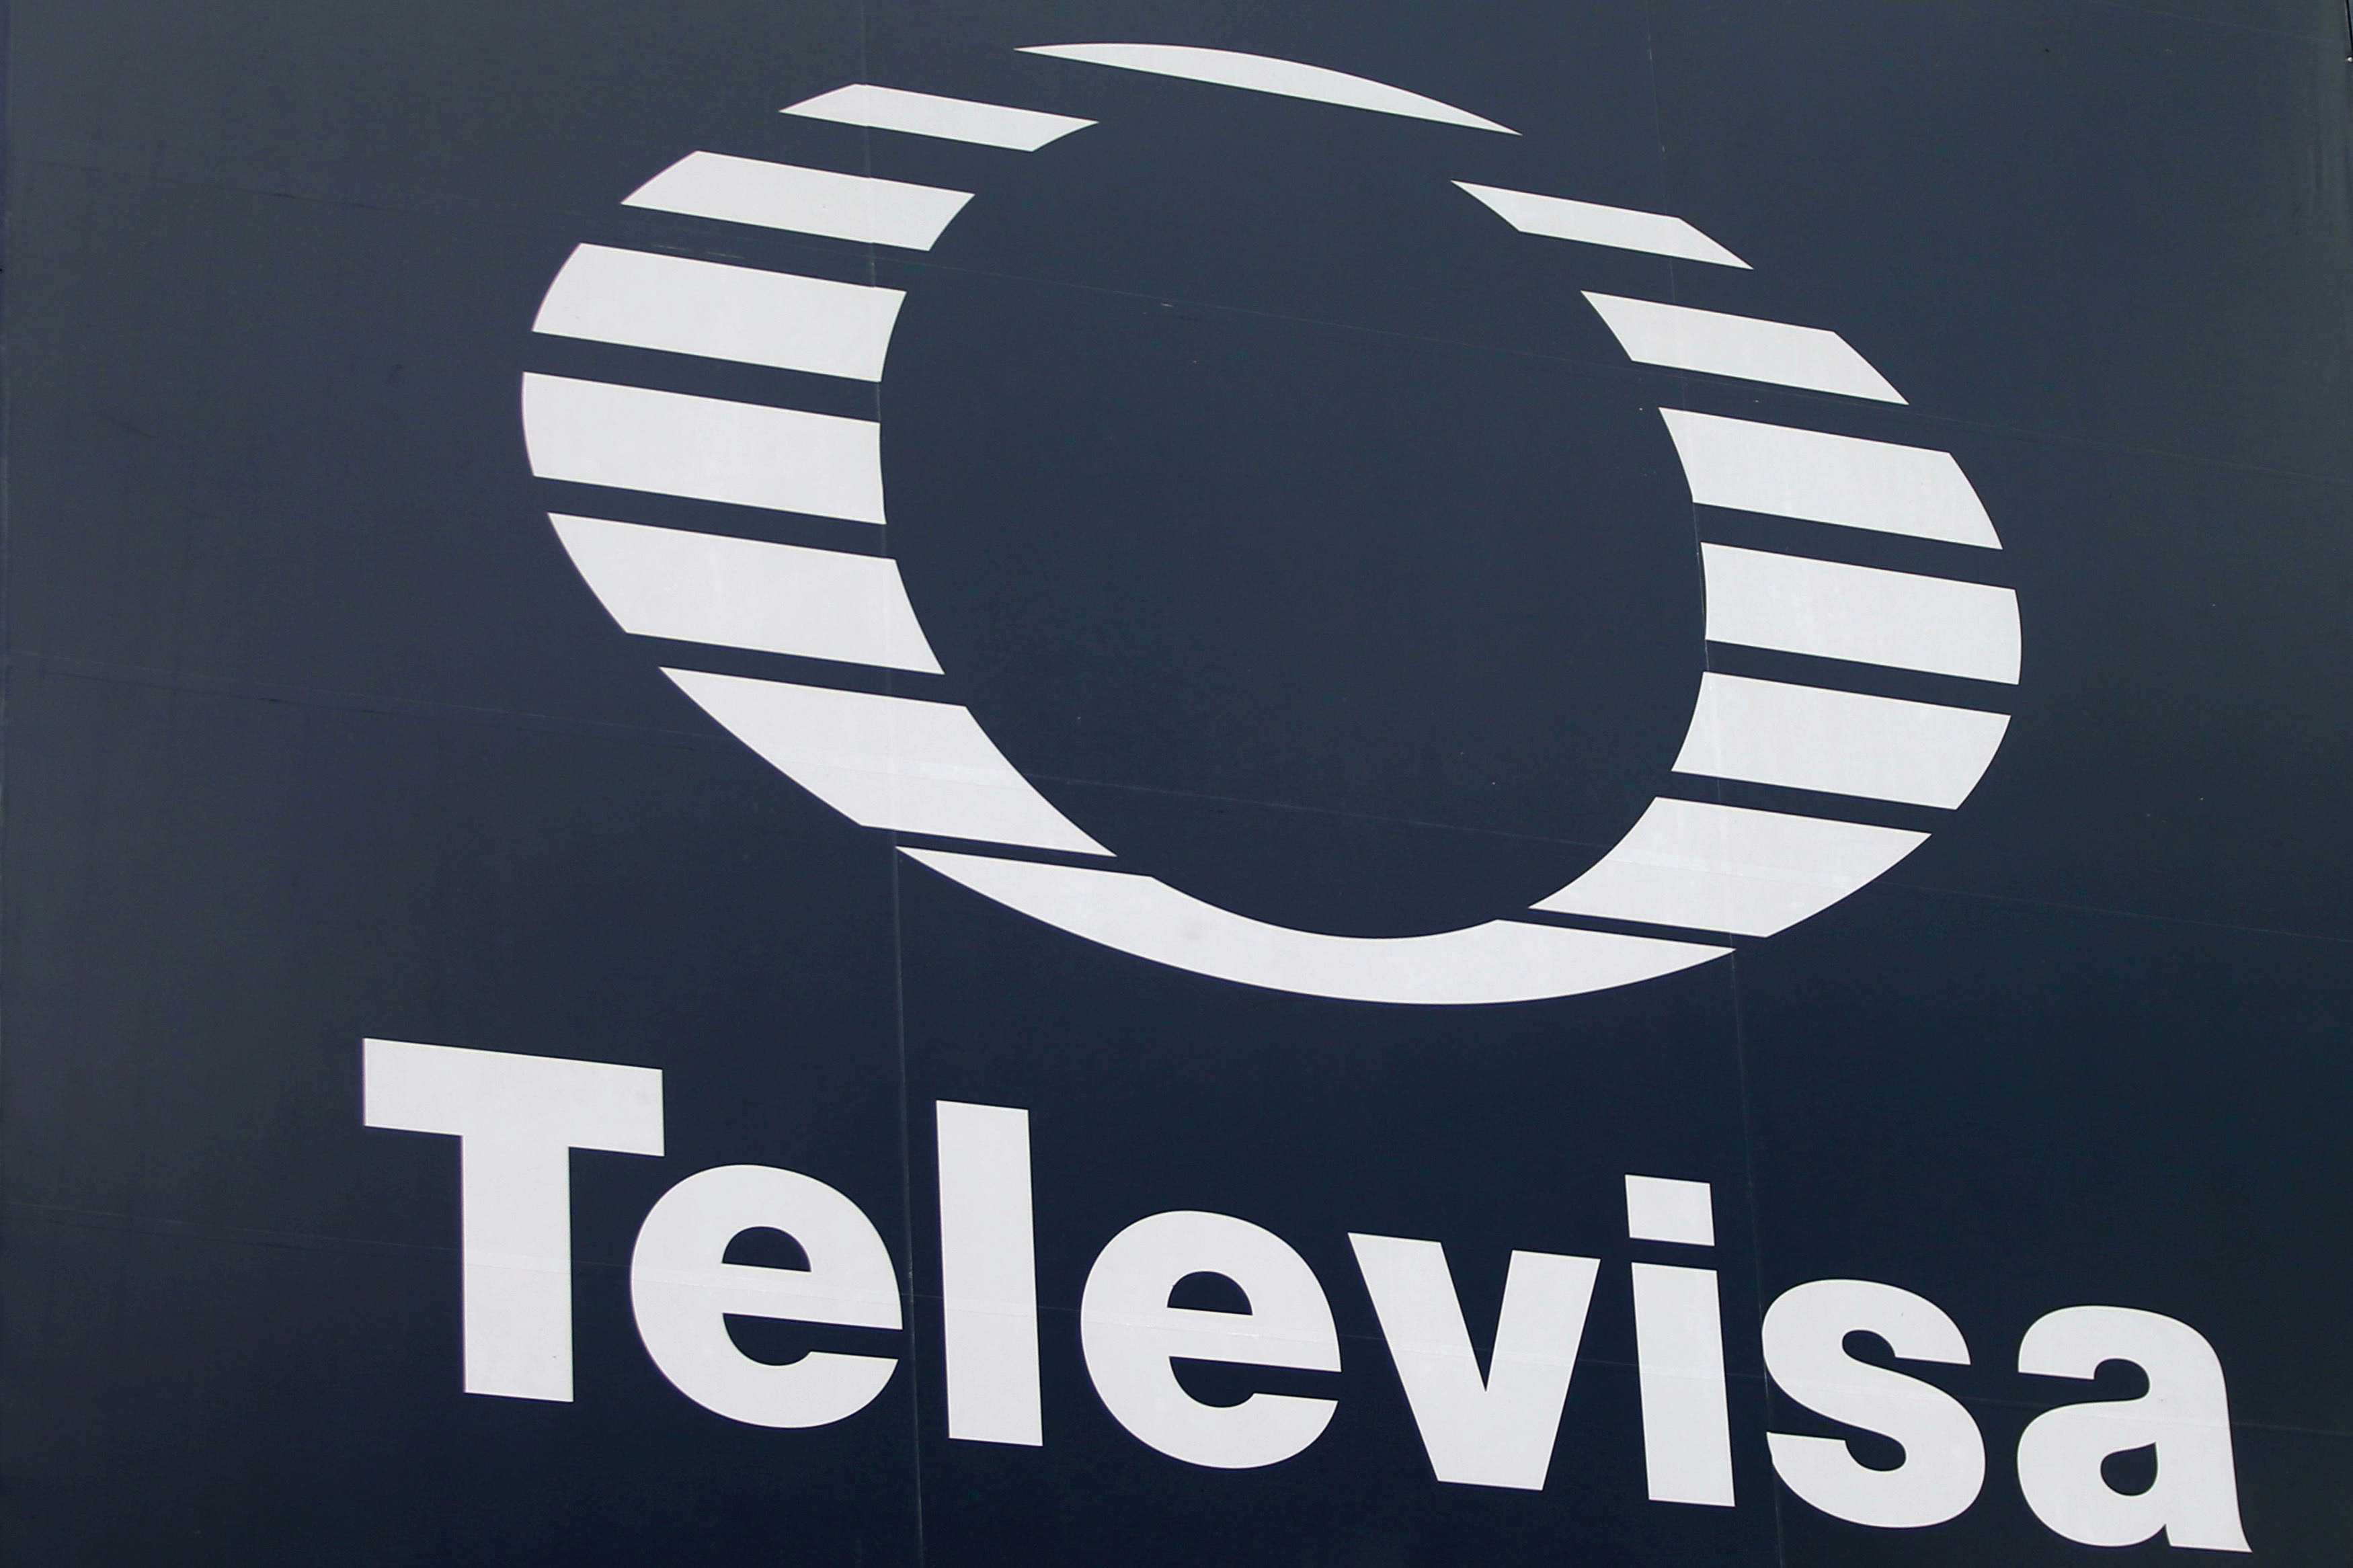 The logo of broadcaster Televisa is seen outside its headquarters in Mexico City